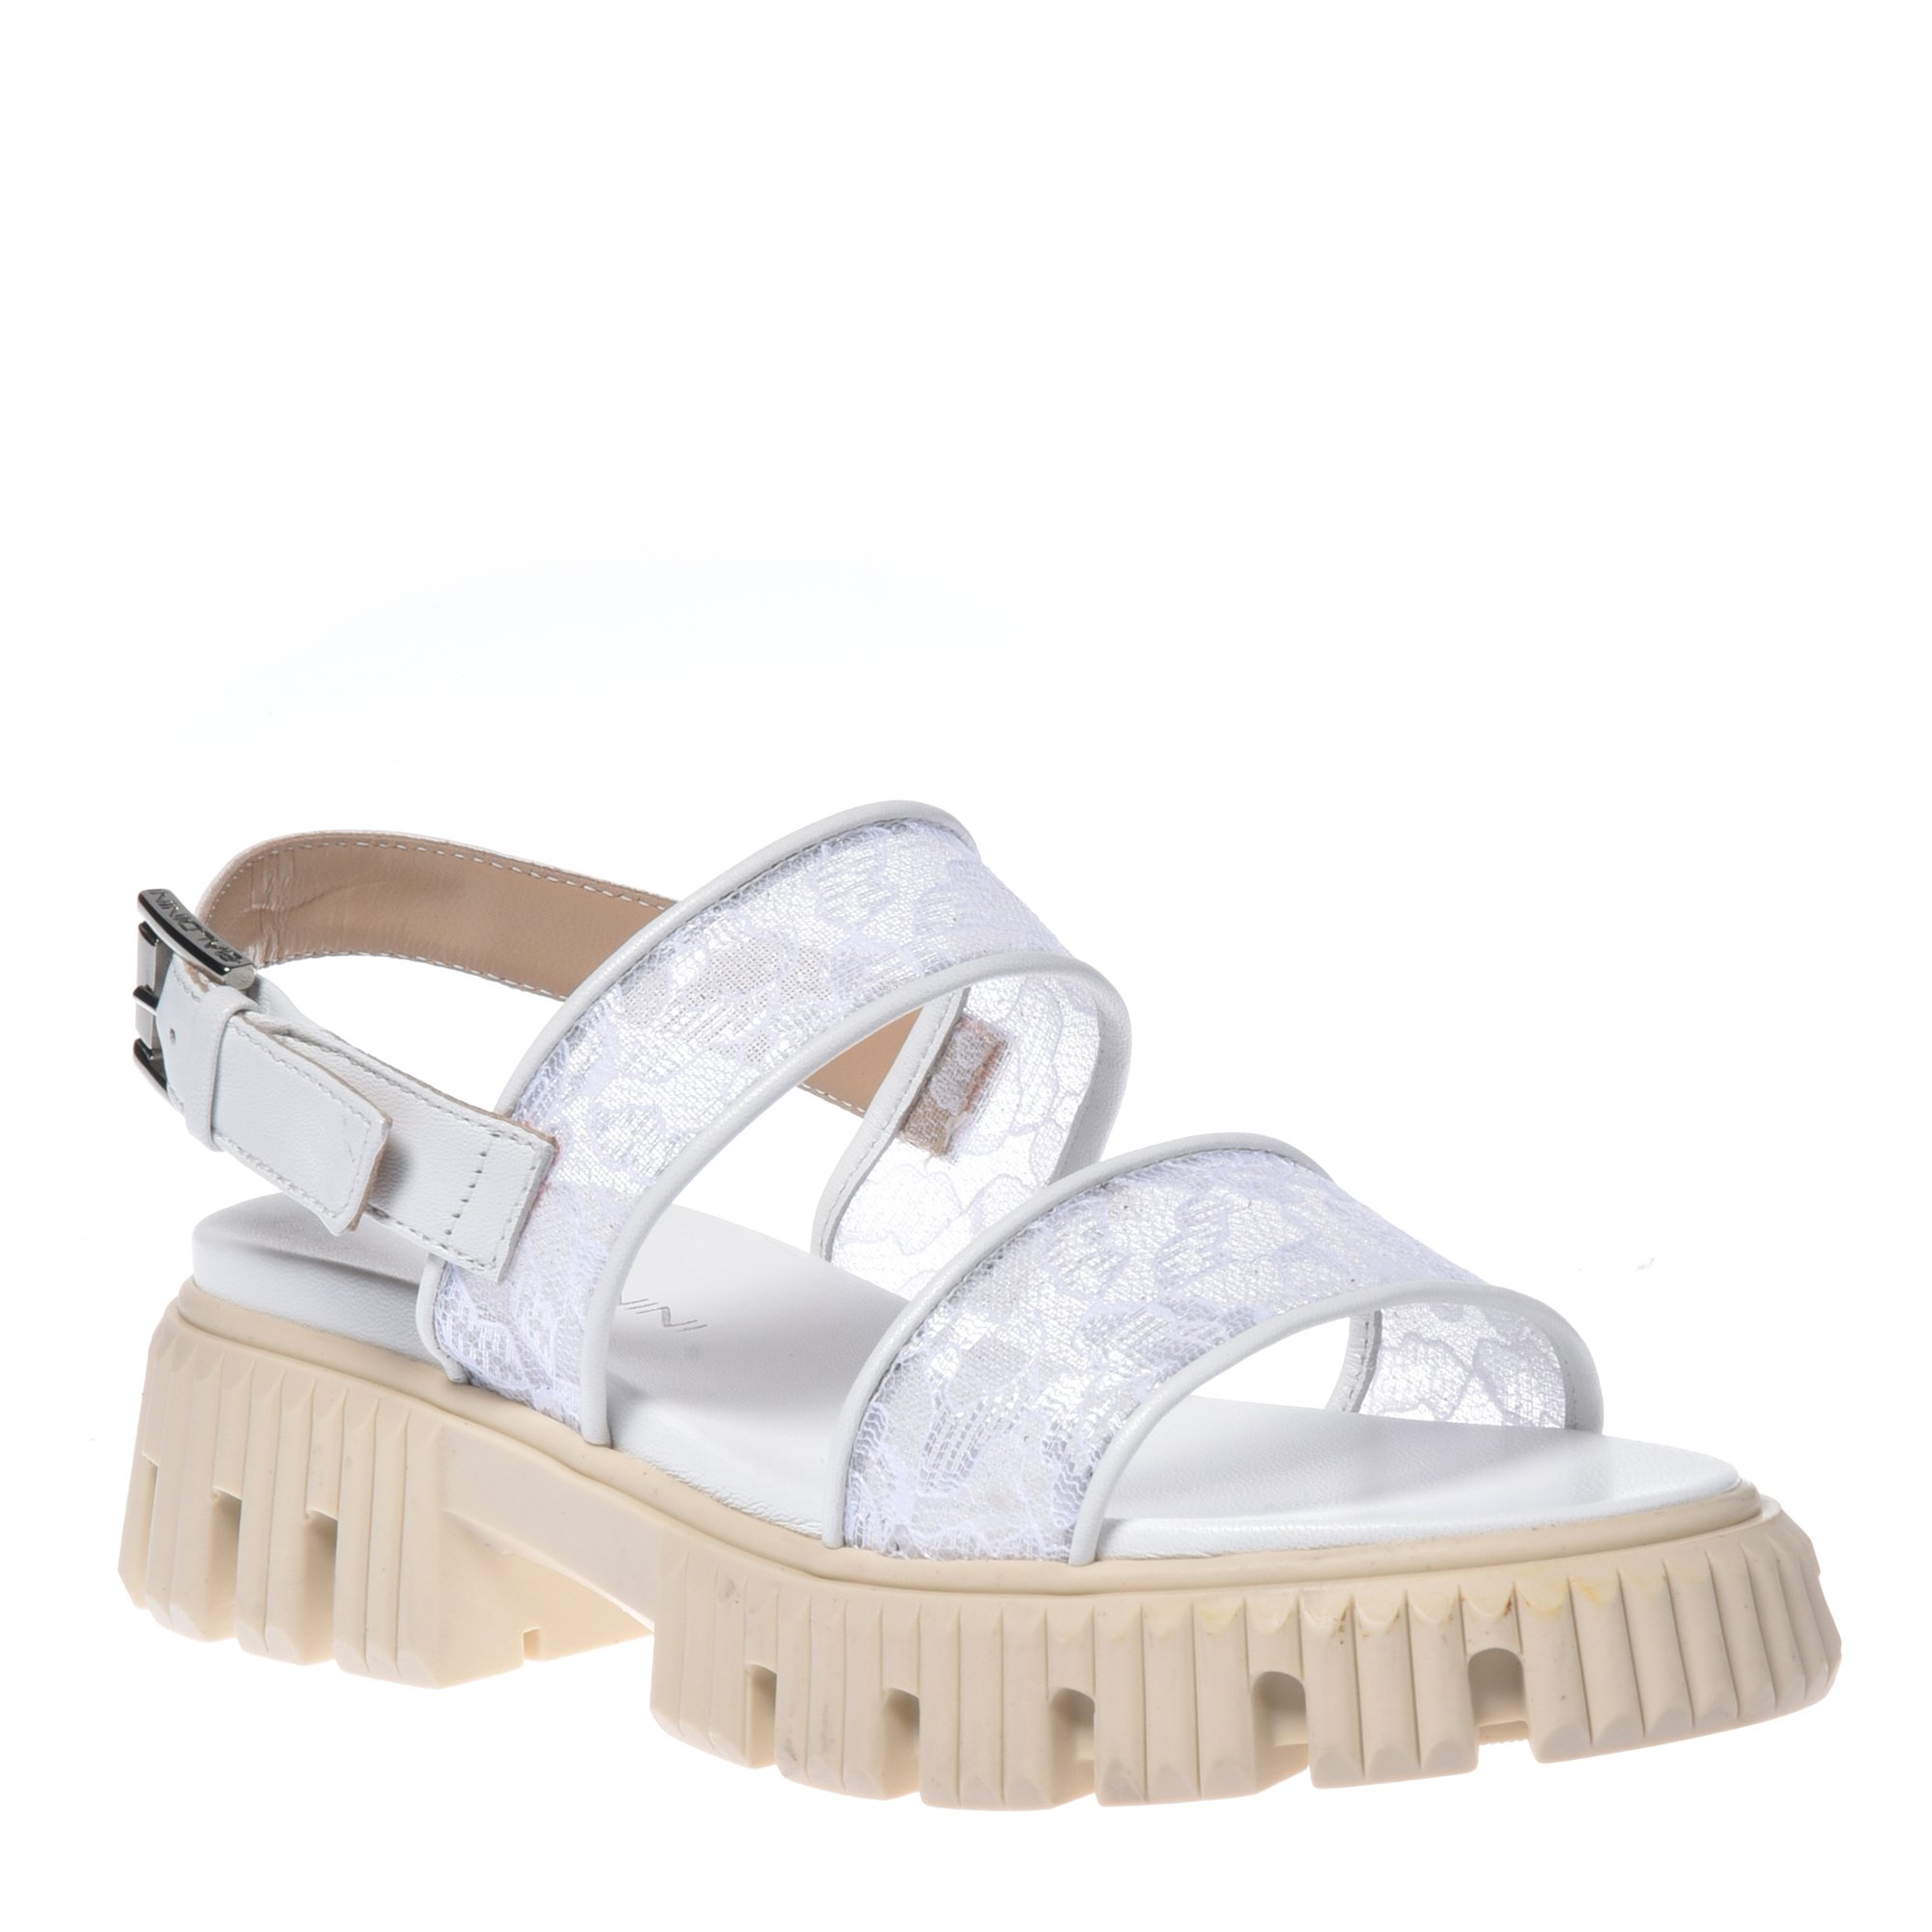 Sandal in white lace image